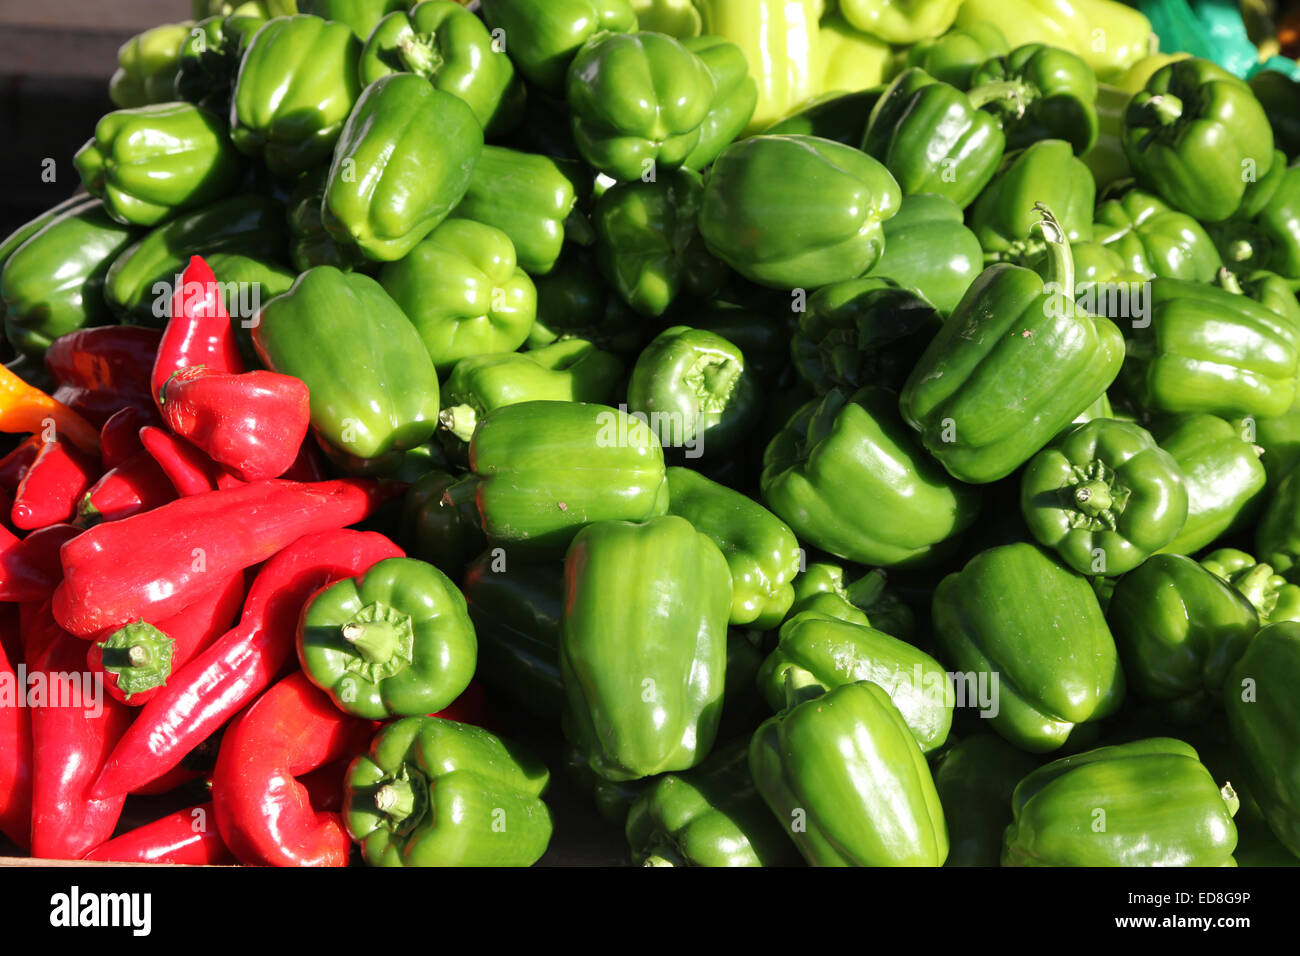 A collection of red and green peppers on a Greek Market stall Stock Photo